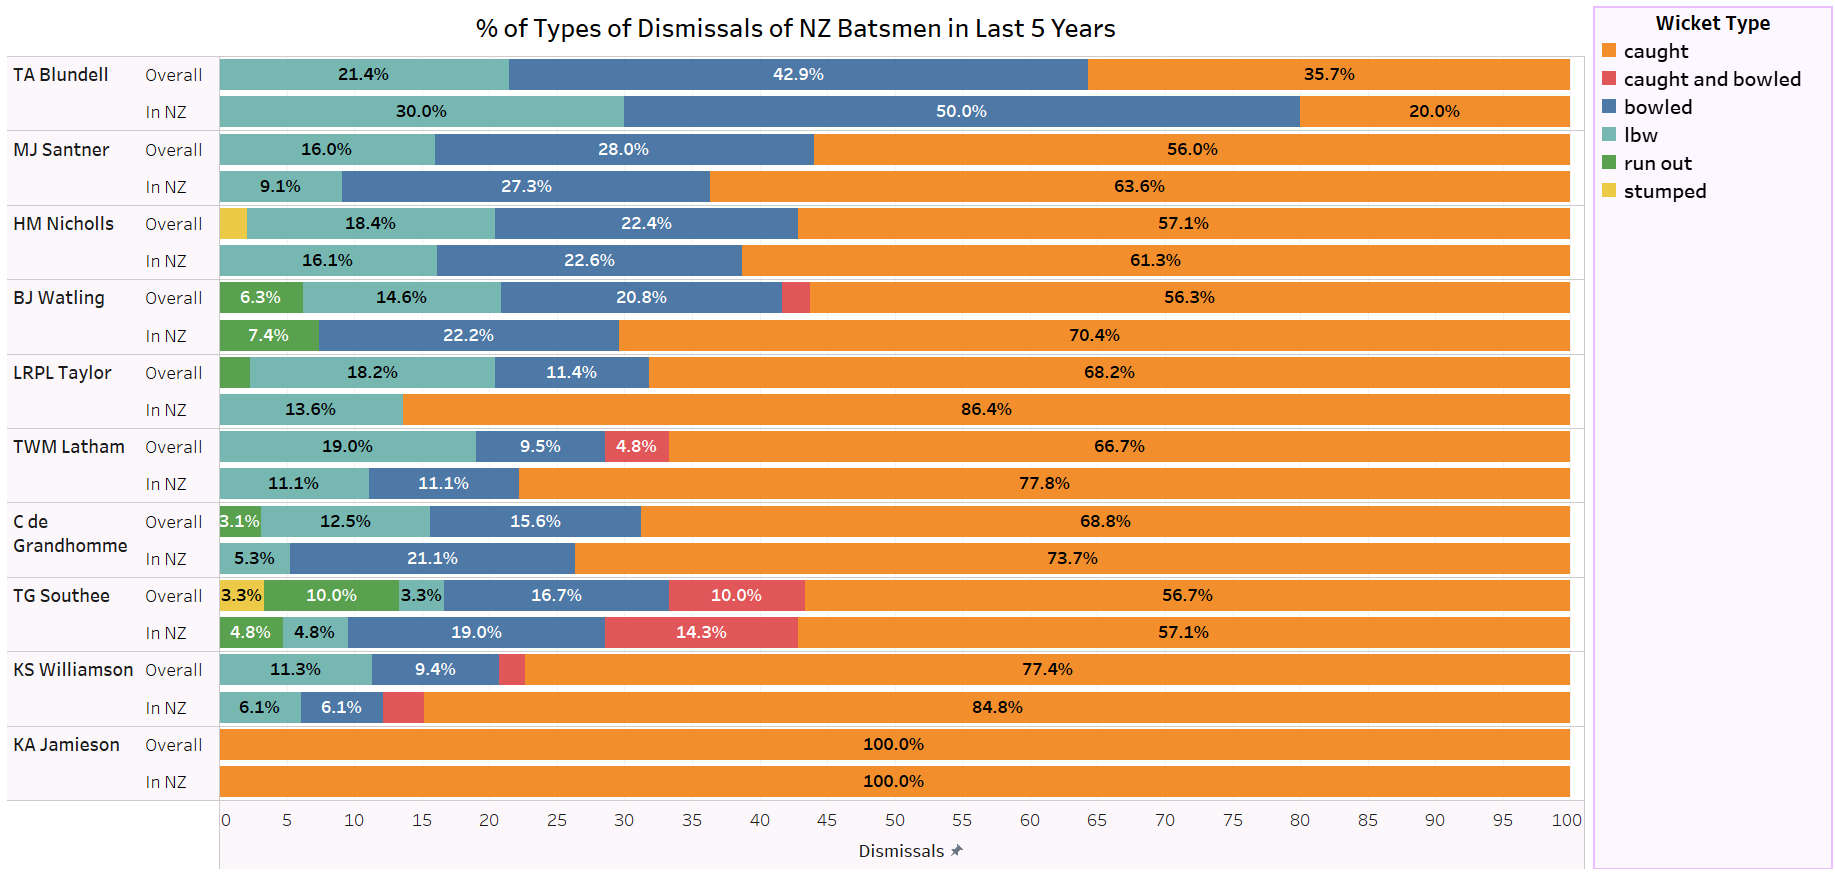 Percentage of different types of dismissals of NZ Batsmen in the last 5 years